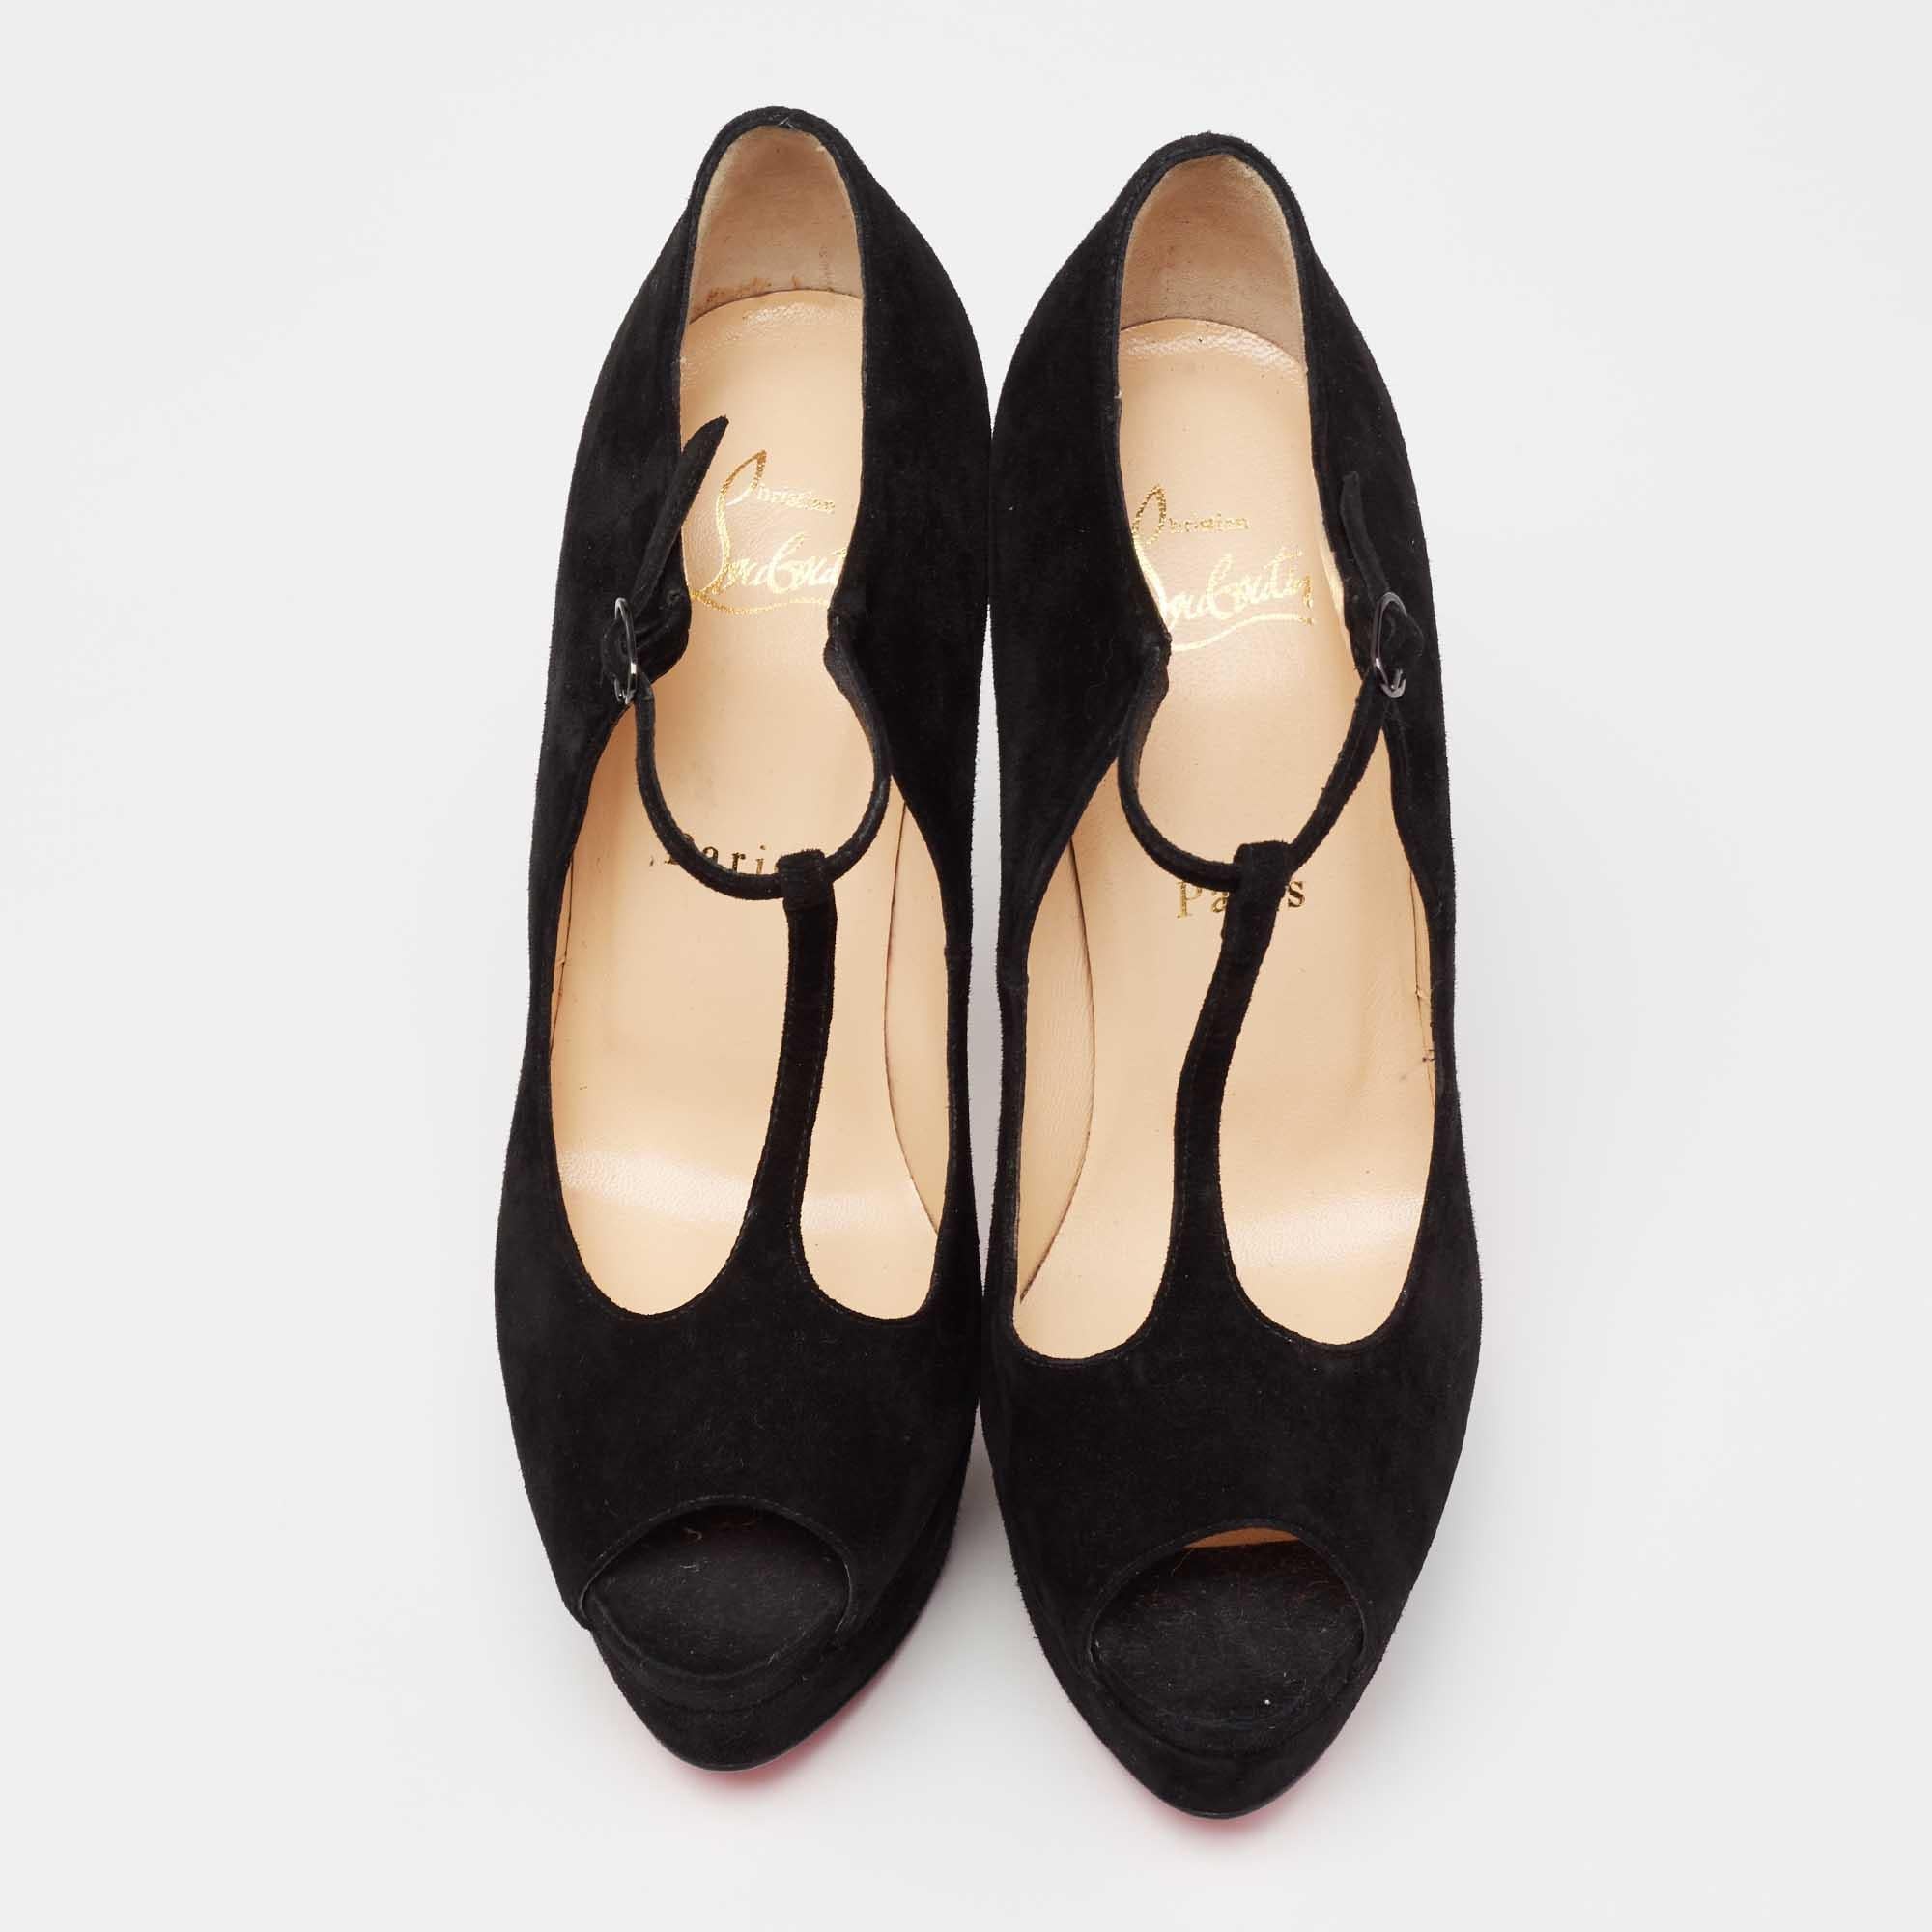 Christian Louboutin's feminine and classy pair of black T-strap pumps are made from smooth suede. The pair features a peep-toe style with peep-toes. The Alta Poppins pumps have comfortable leather-lined insoles. Pair this up with dresses for a dose